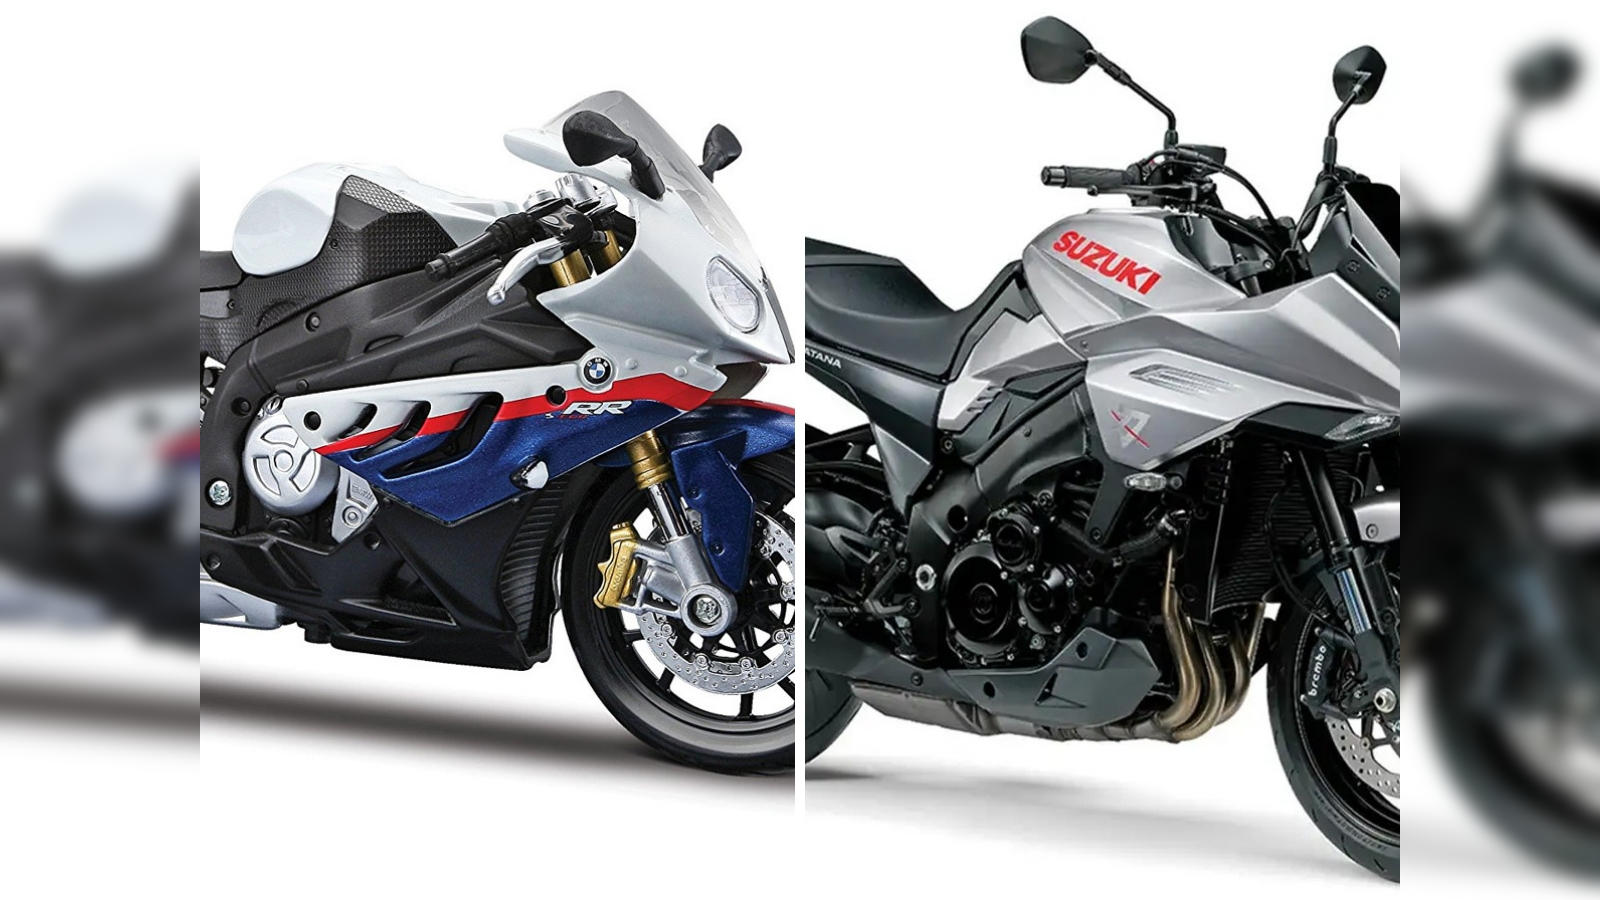 EICMA: BMW S 1000 RR, Suzuki KATANA: Hottest motorcycles that will get your  heart racing - The Economic Times